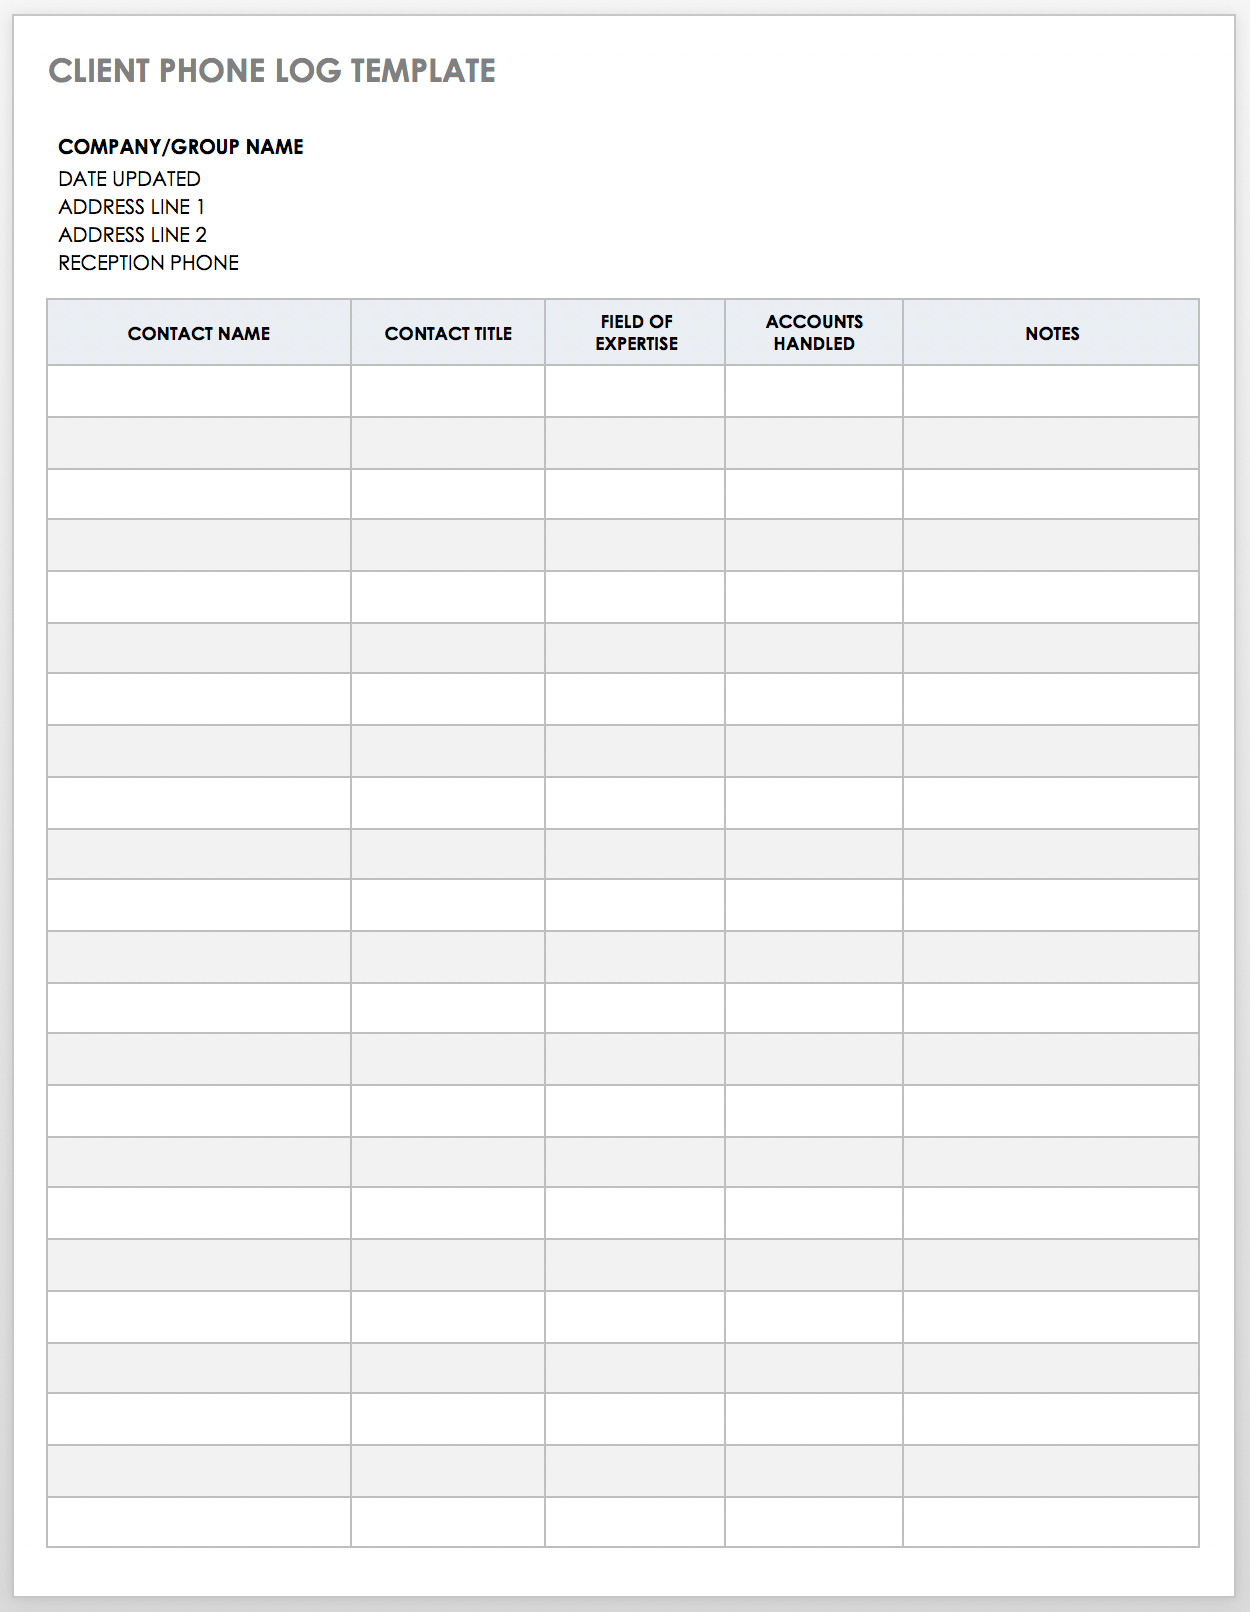 Client Phone Log Template